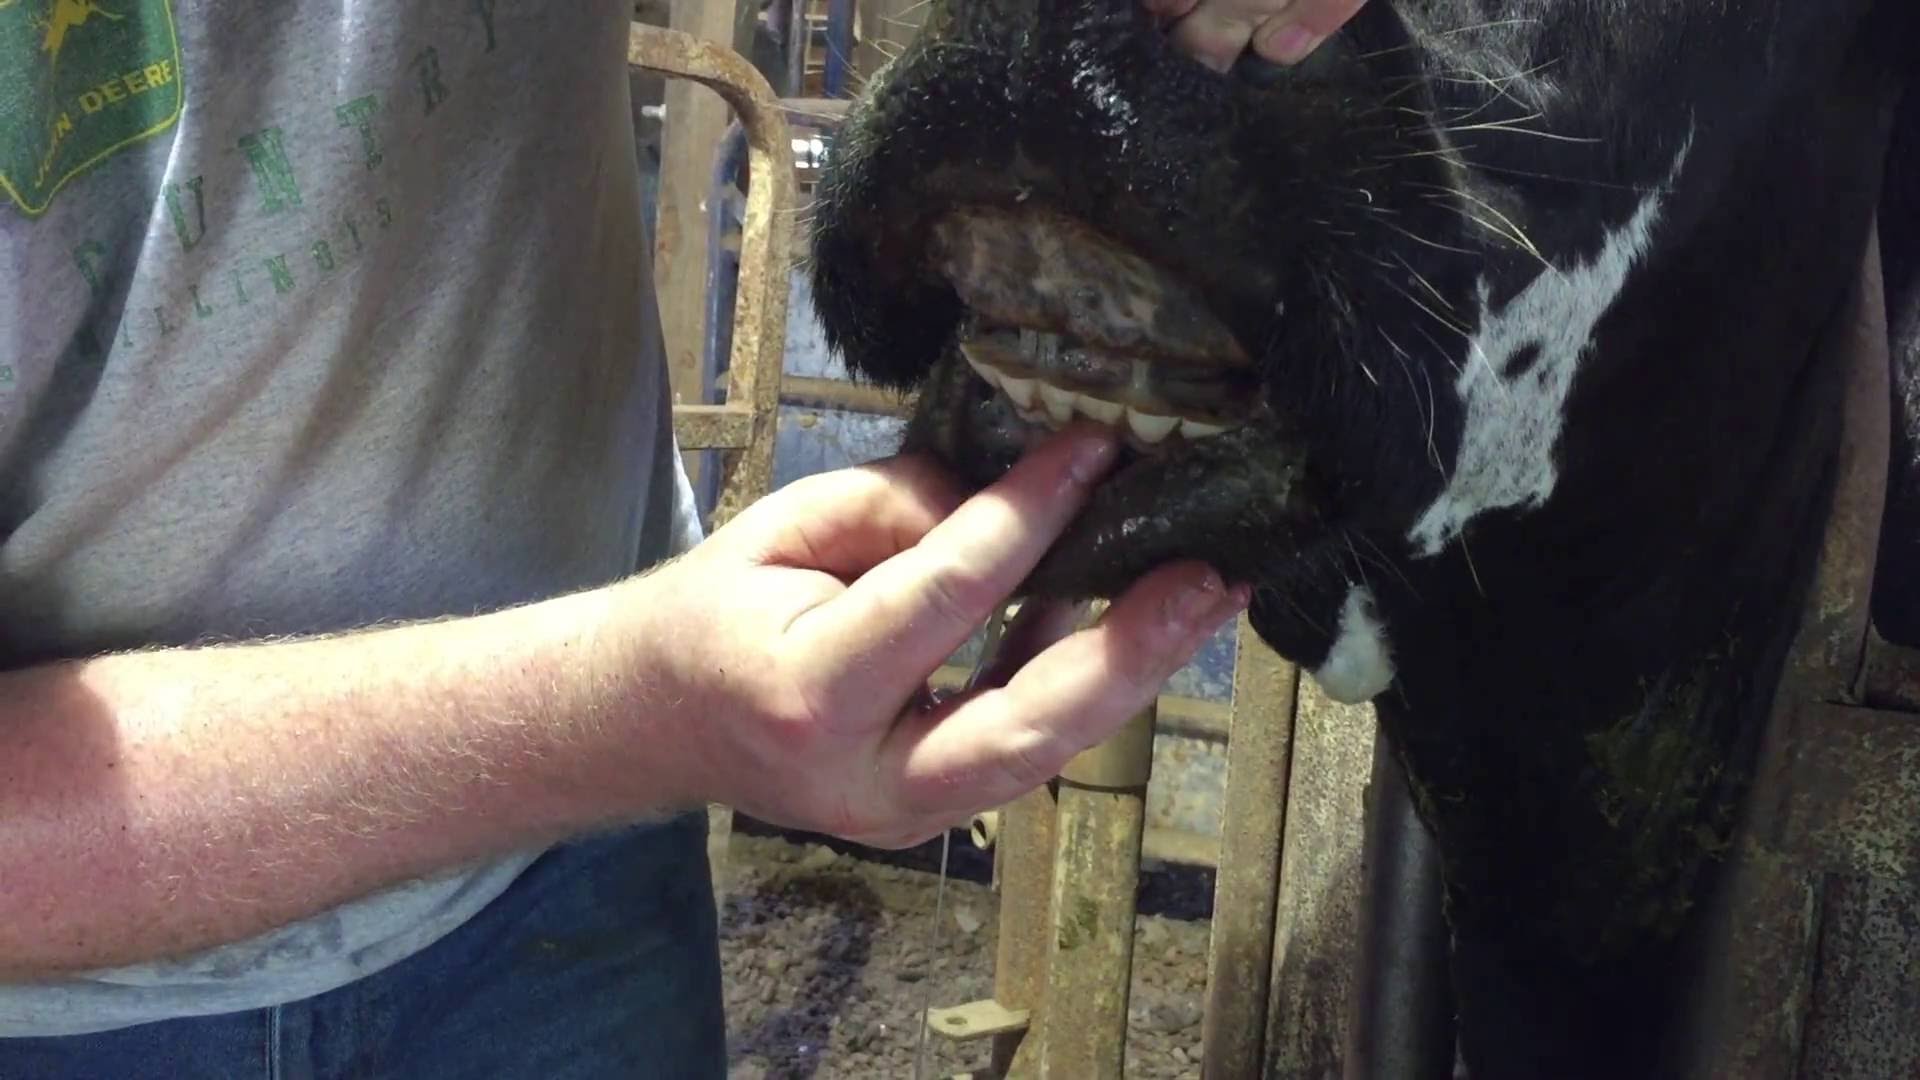 Do cows have teeth? - YouTube